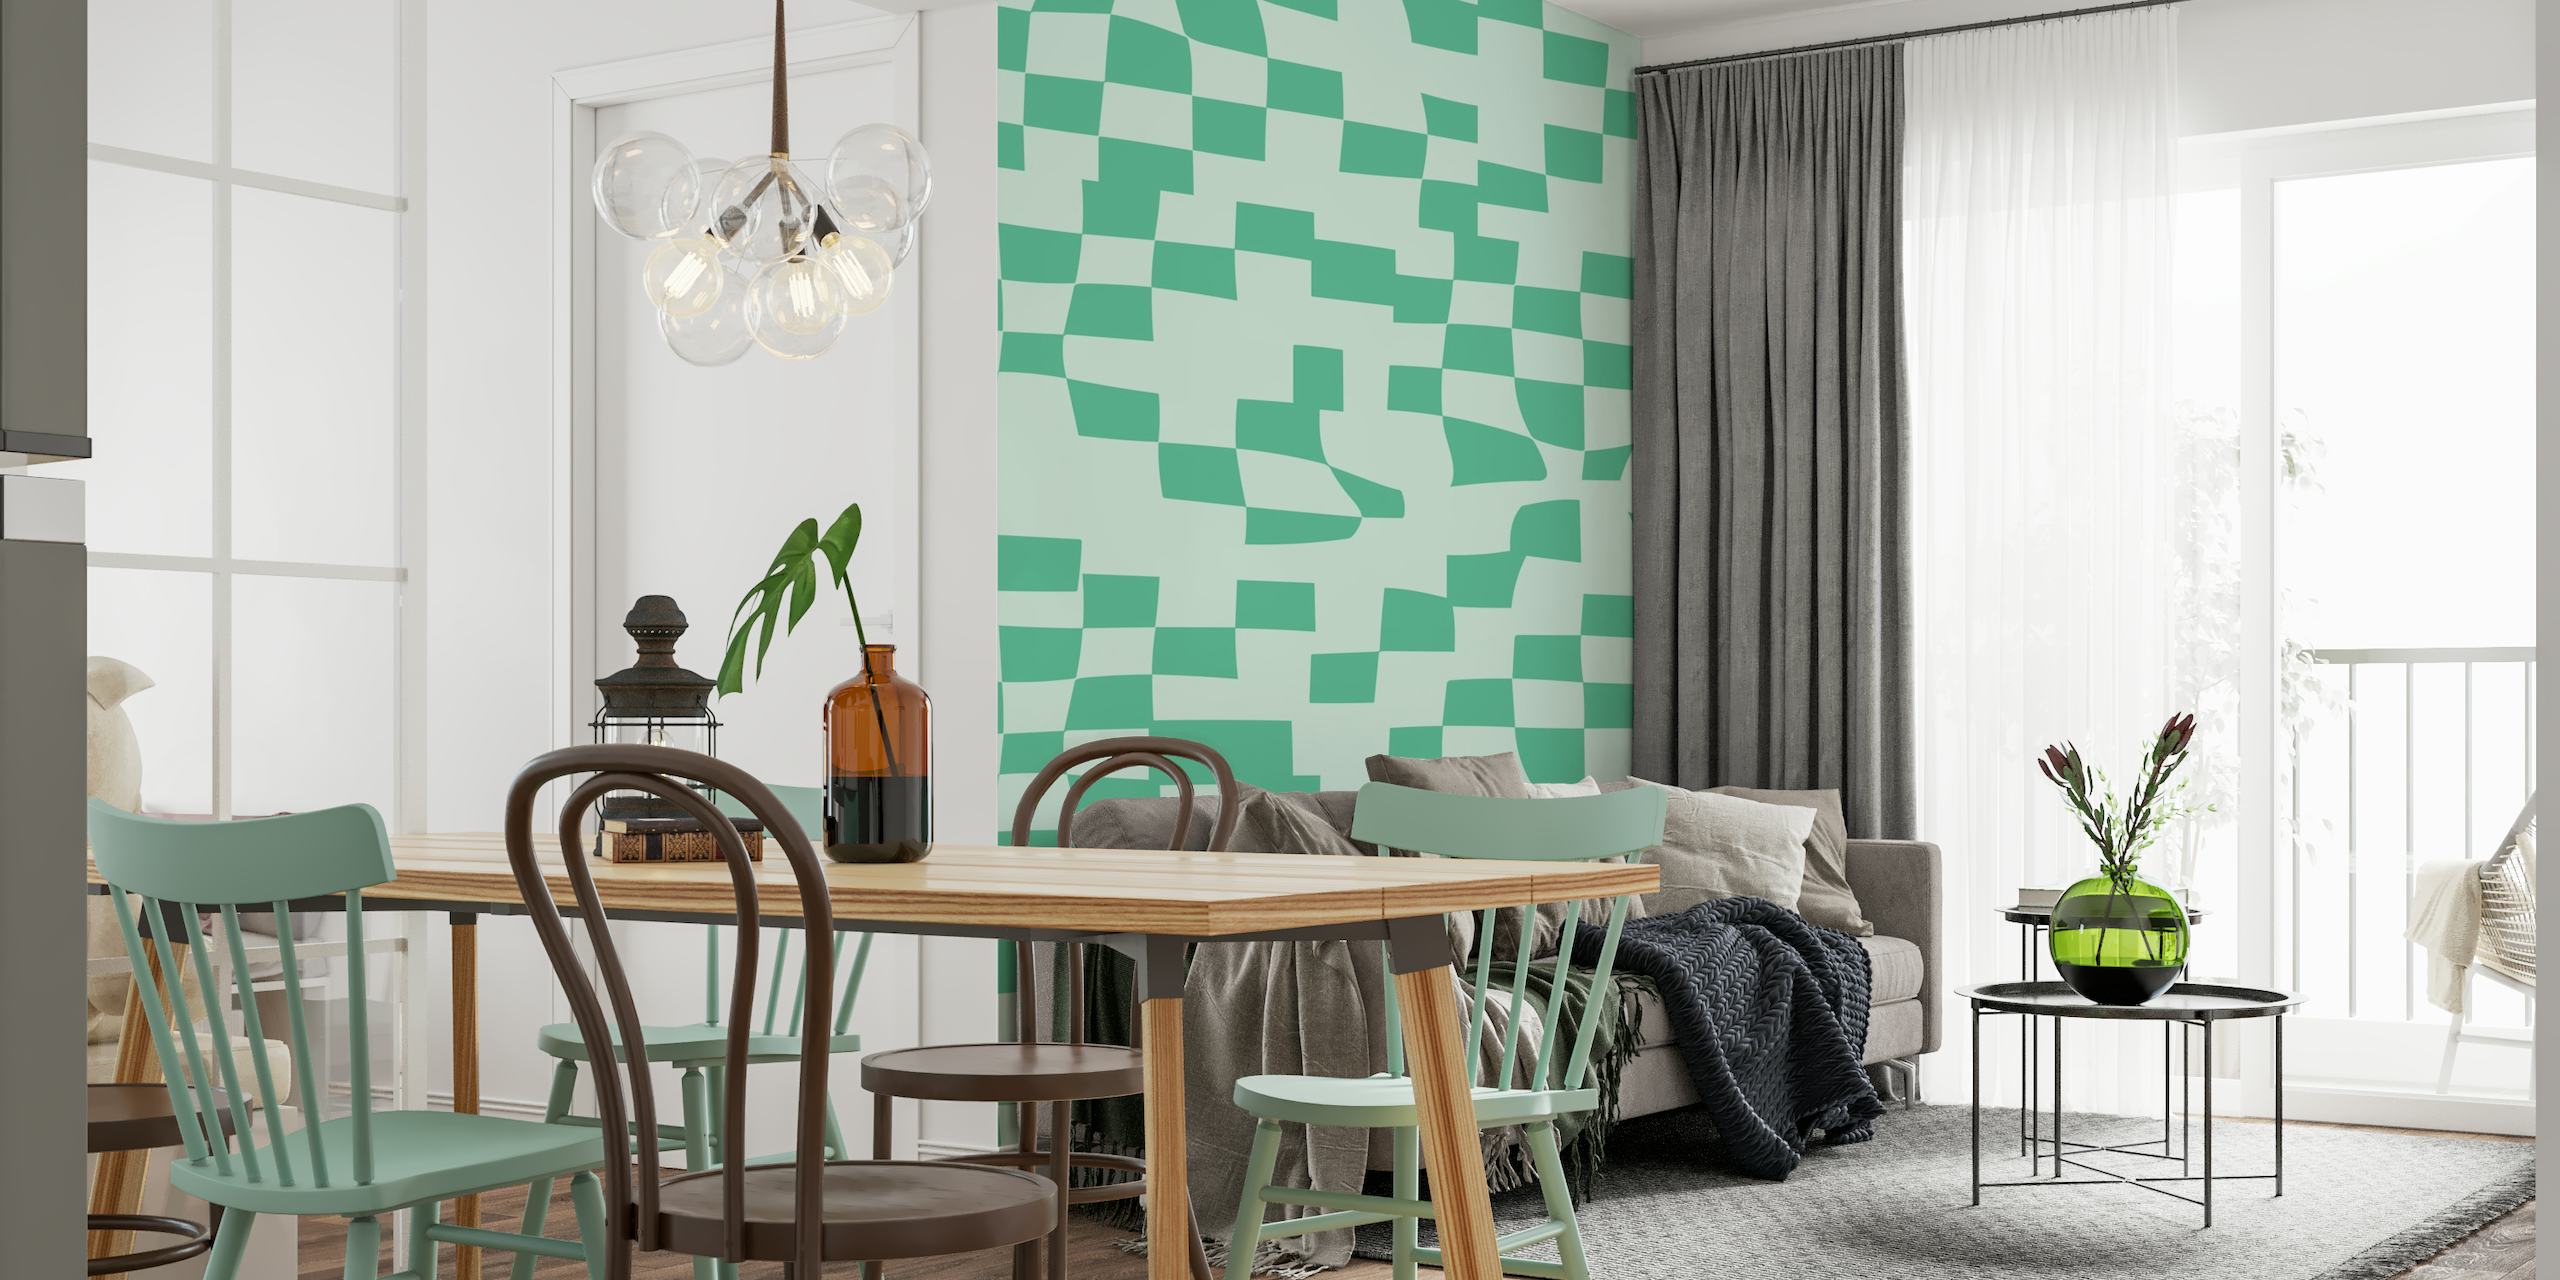 Abstract Checkerboard in Light Blue and Green wallpaper